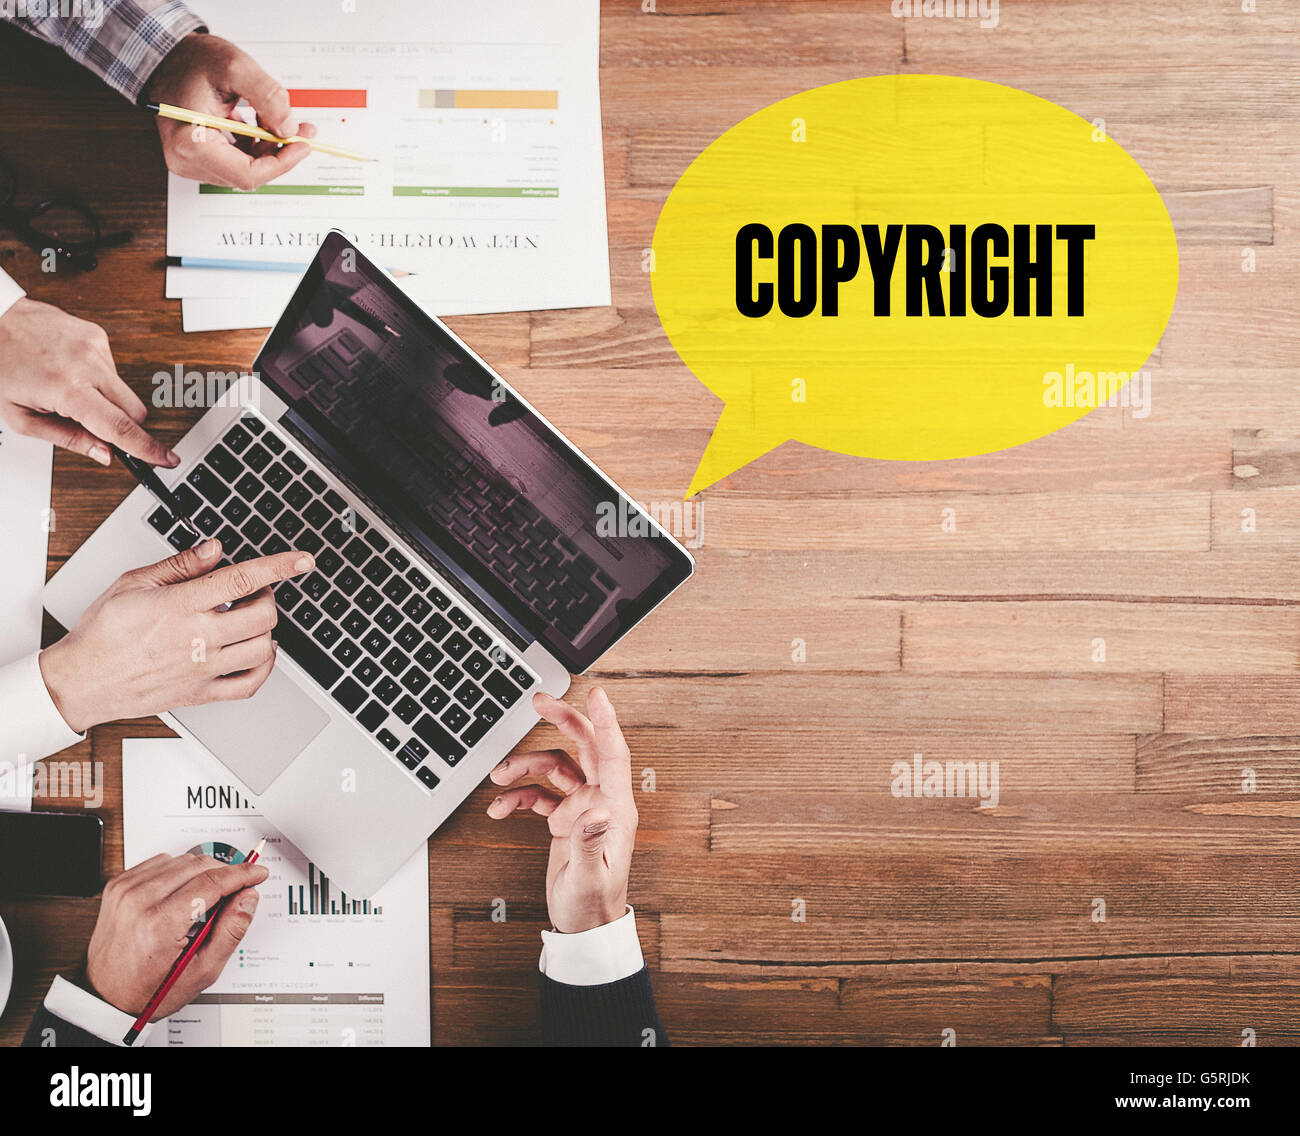 BUSINESS TEAM WORKING IN OFFICE WITH COPYRIGHT SPEECH BUBBLE ON DESK Stock Photo